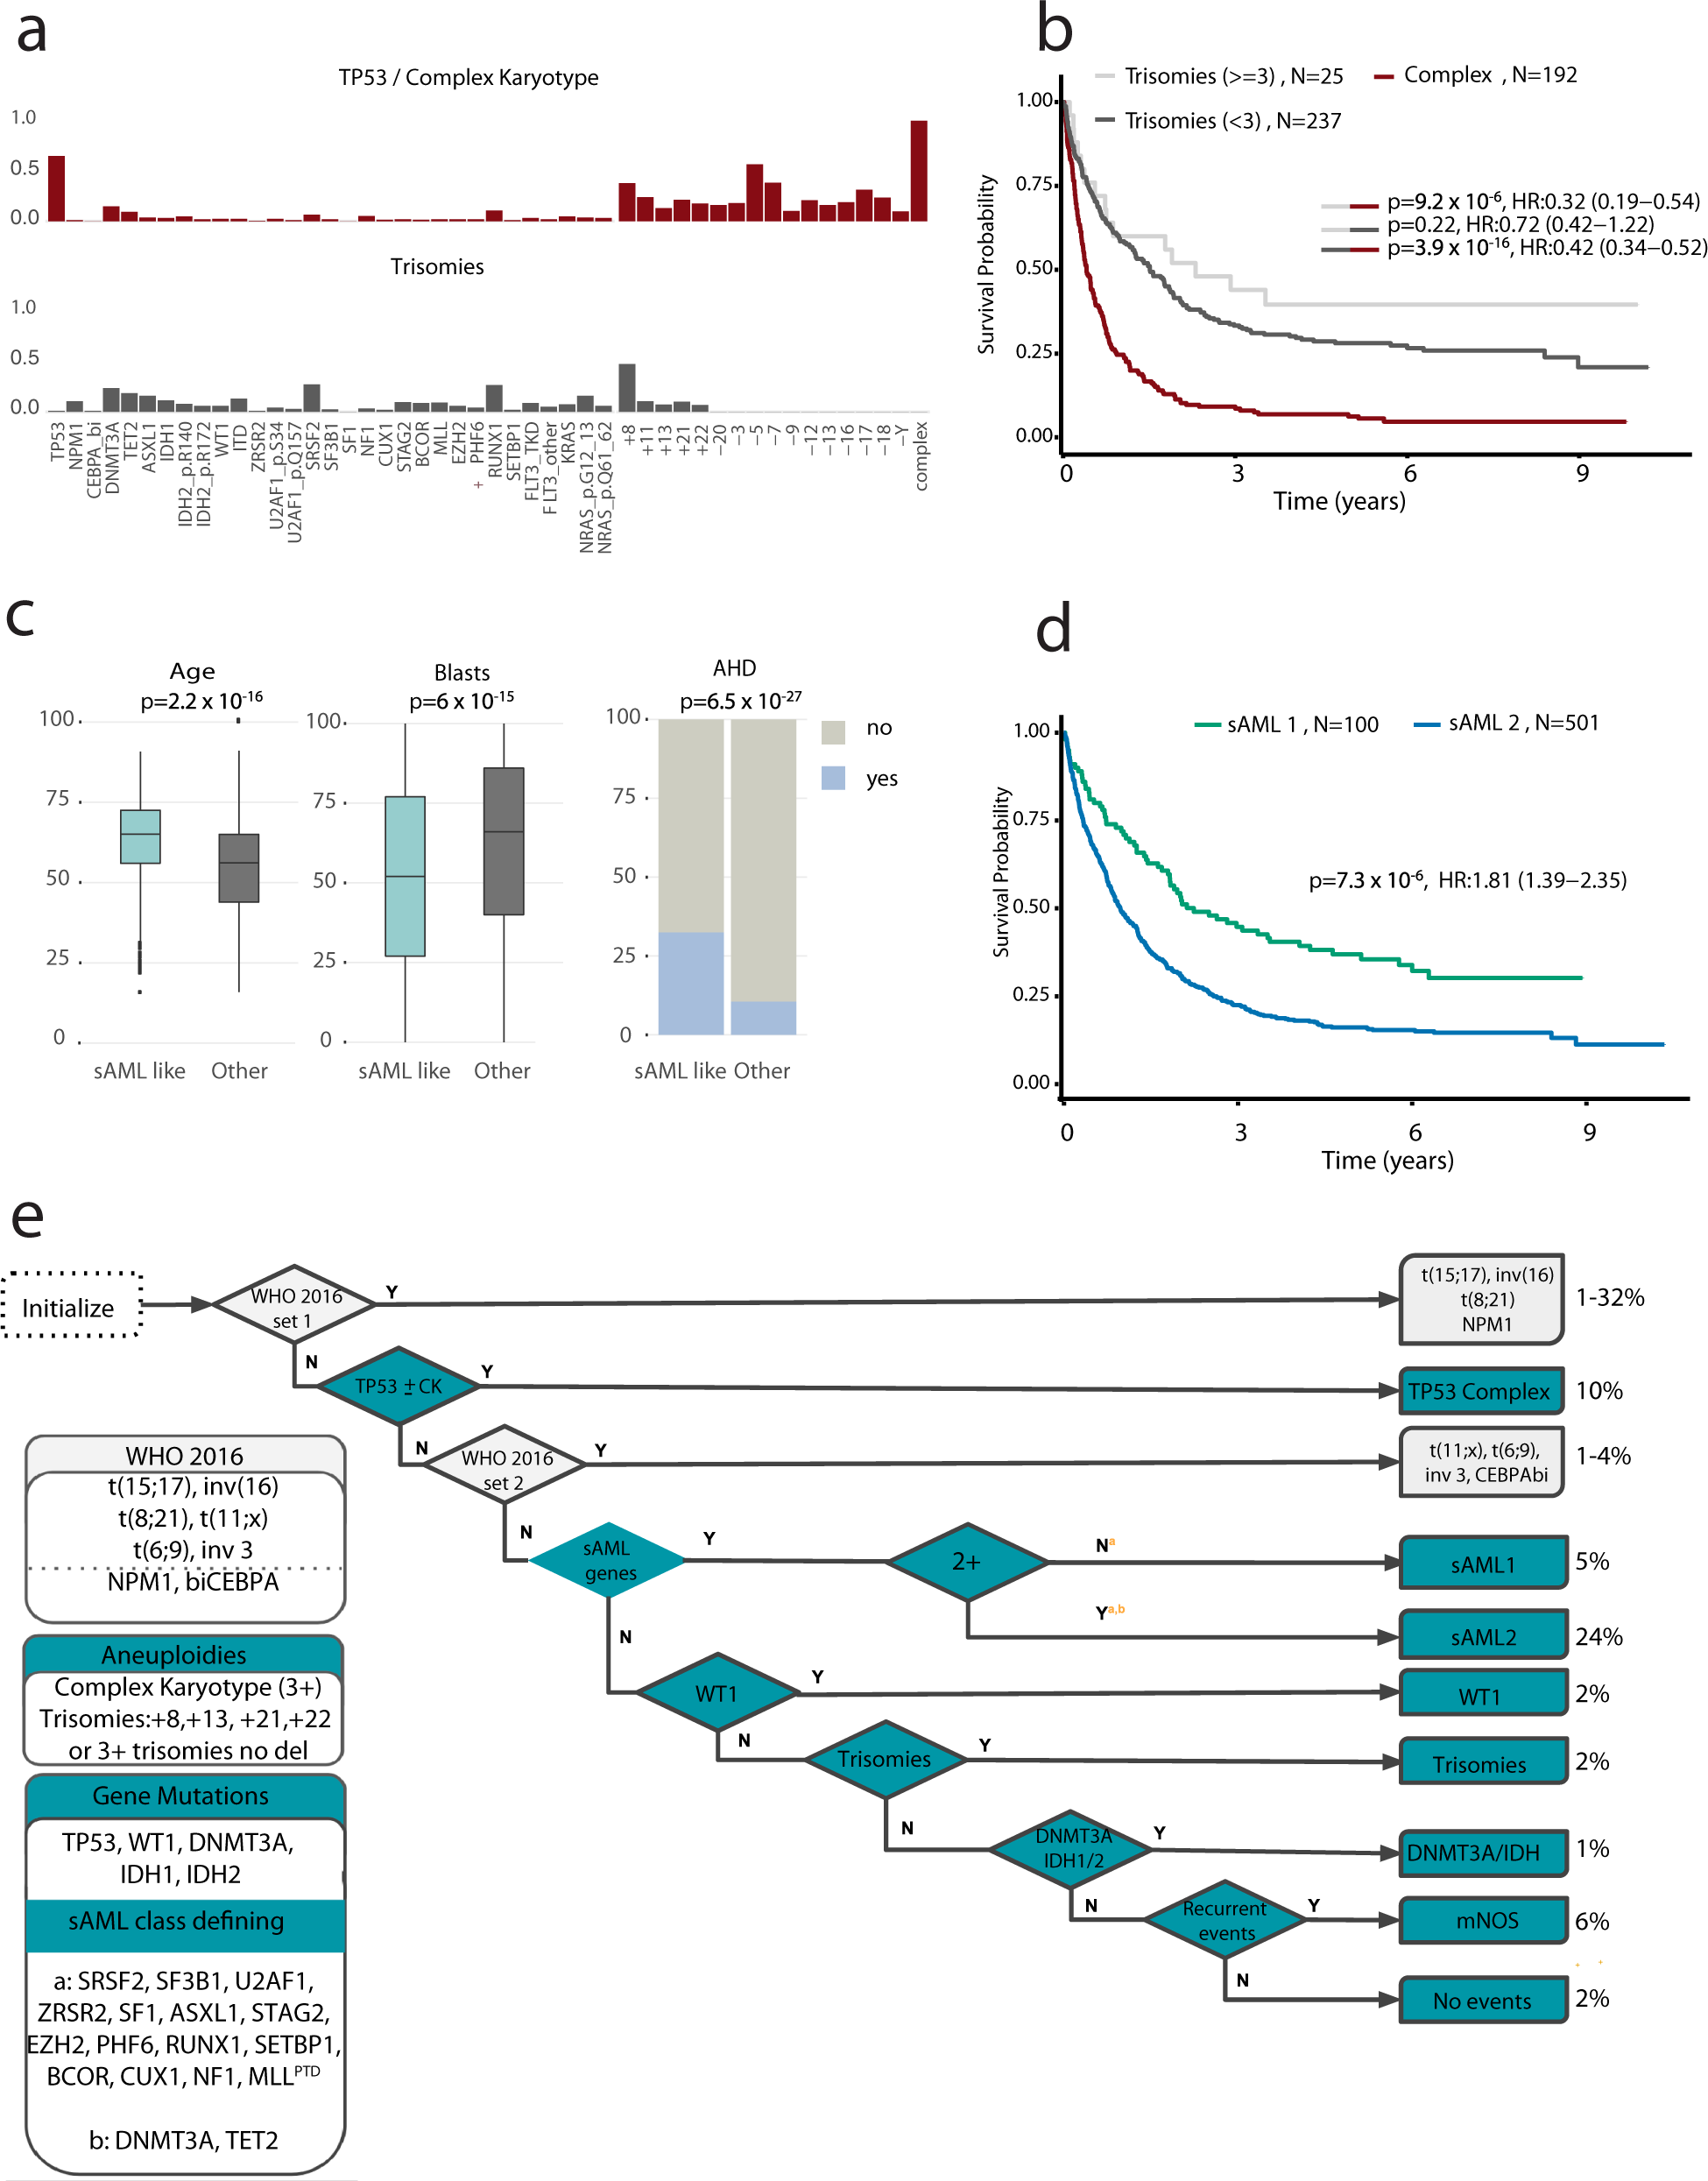 Unified classification and risk-stratification in Acute Myeloid Leukemia |  Nature Communications